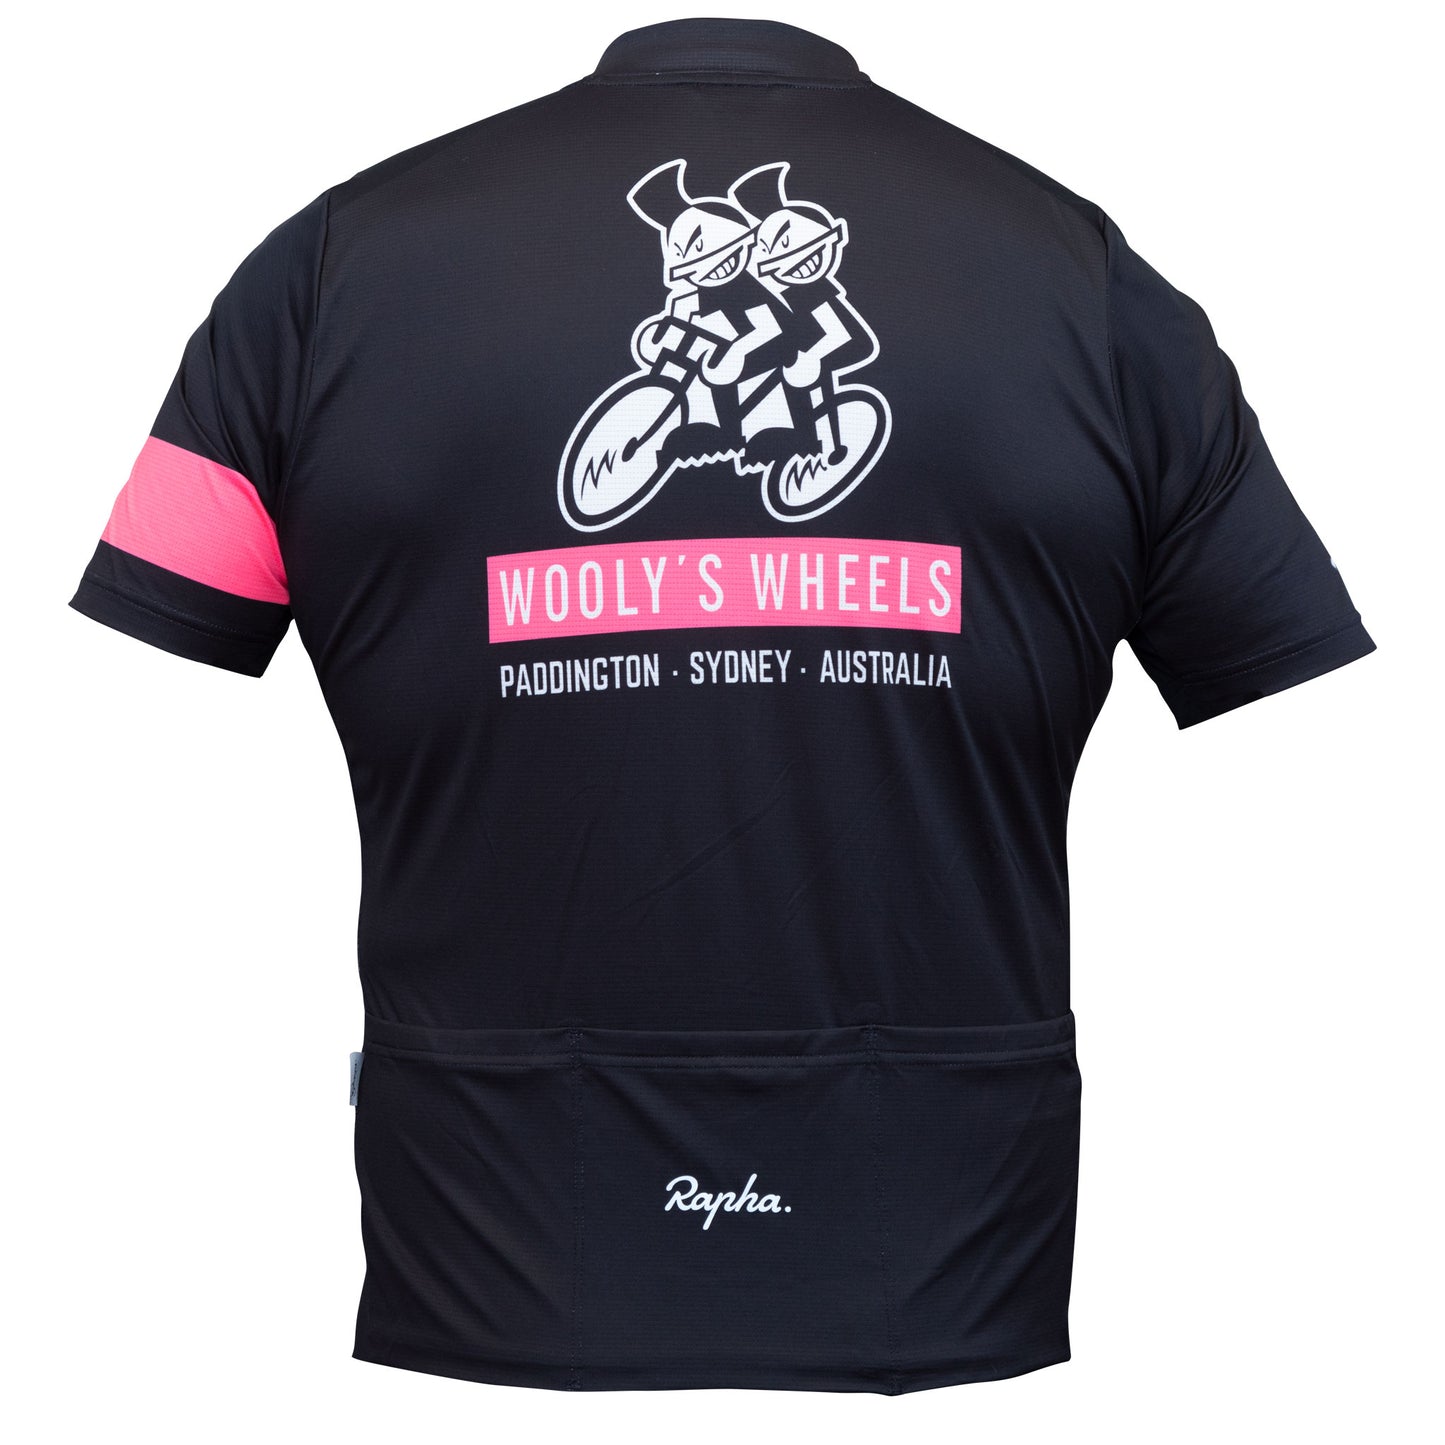 Rapha Wooly's Wheels Retro Classic Jersey